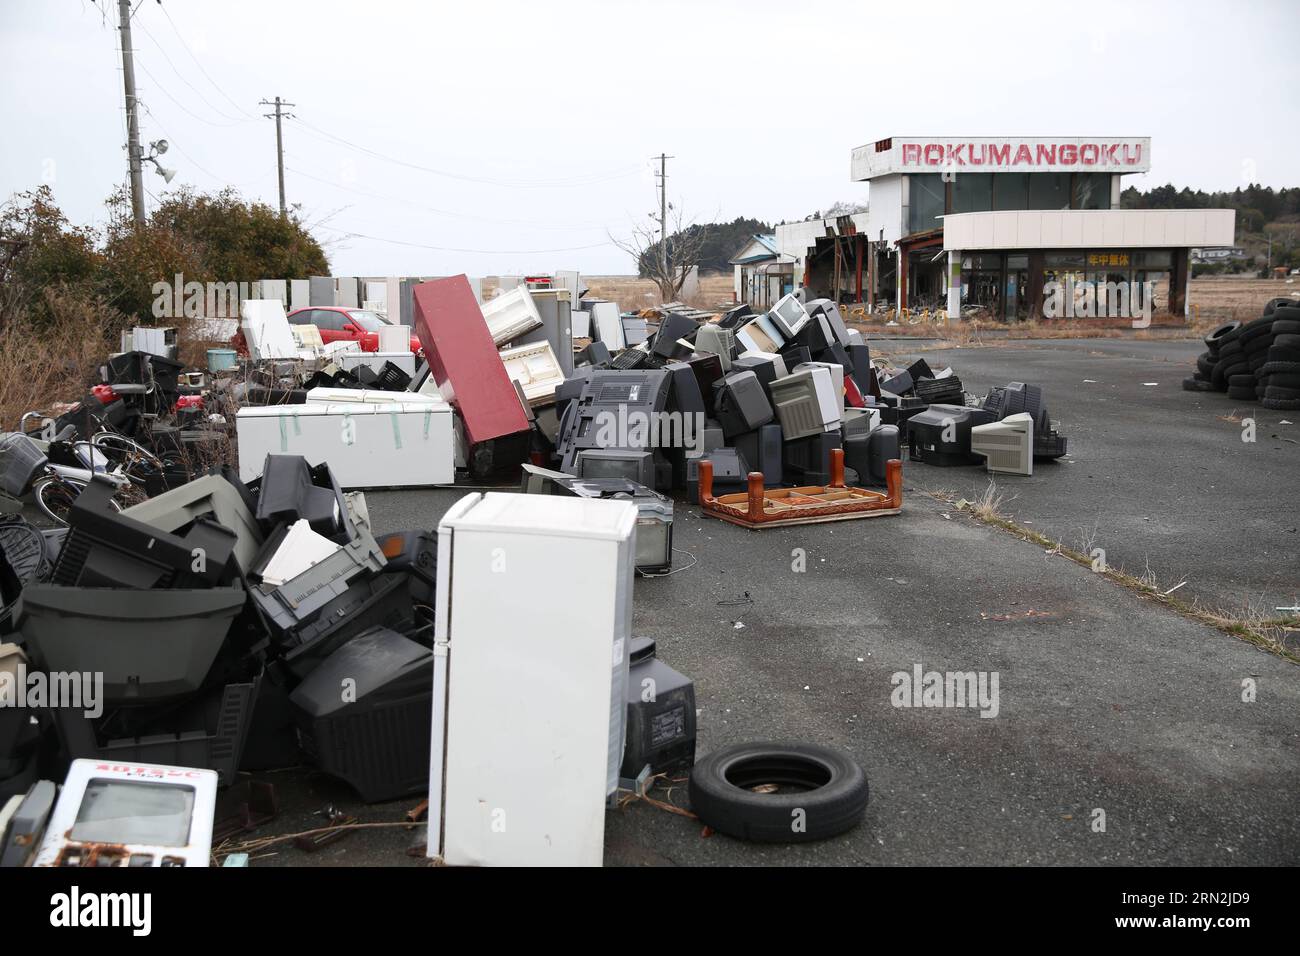 (150310) -- FUKUSHIMA, March 10, 2015 -- Abandoned houses and wastes are seen in the Futaba District, located well within the 20-kilometer exclusion radius around the leaking facilities of Fukushima Daiichi nuclear power plant, in Fukushima Prefecture, Japan, March 7, 2015. The scenes from the towns and villages still abandoned four years after an earthquake triggered tsunami breached the defenses of the Fukushima Daiichi nuclear power plant, would make for the perfect backdrop for a post- apocalyptic Hollywood zombie movie, but the trouble would be that the levels of radiation in the area wou Stock Photo